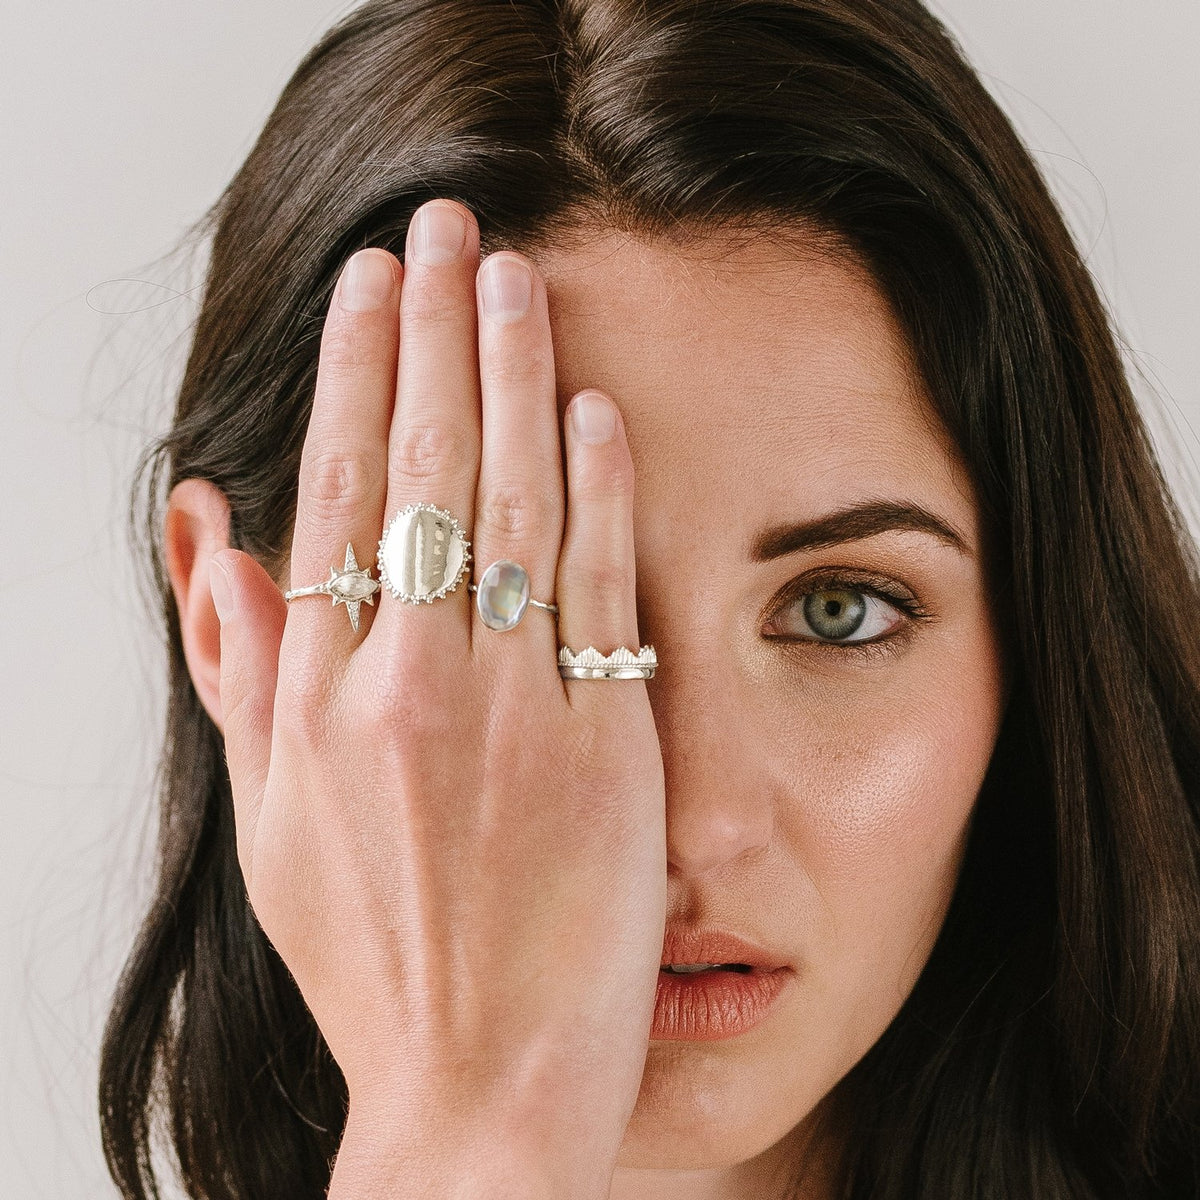 PROTECT OVAL RING - RAINBOW MOONSTONE &amp; SILVER - SO PRETTY CARA COTTER